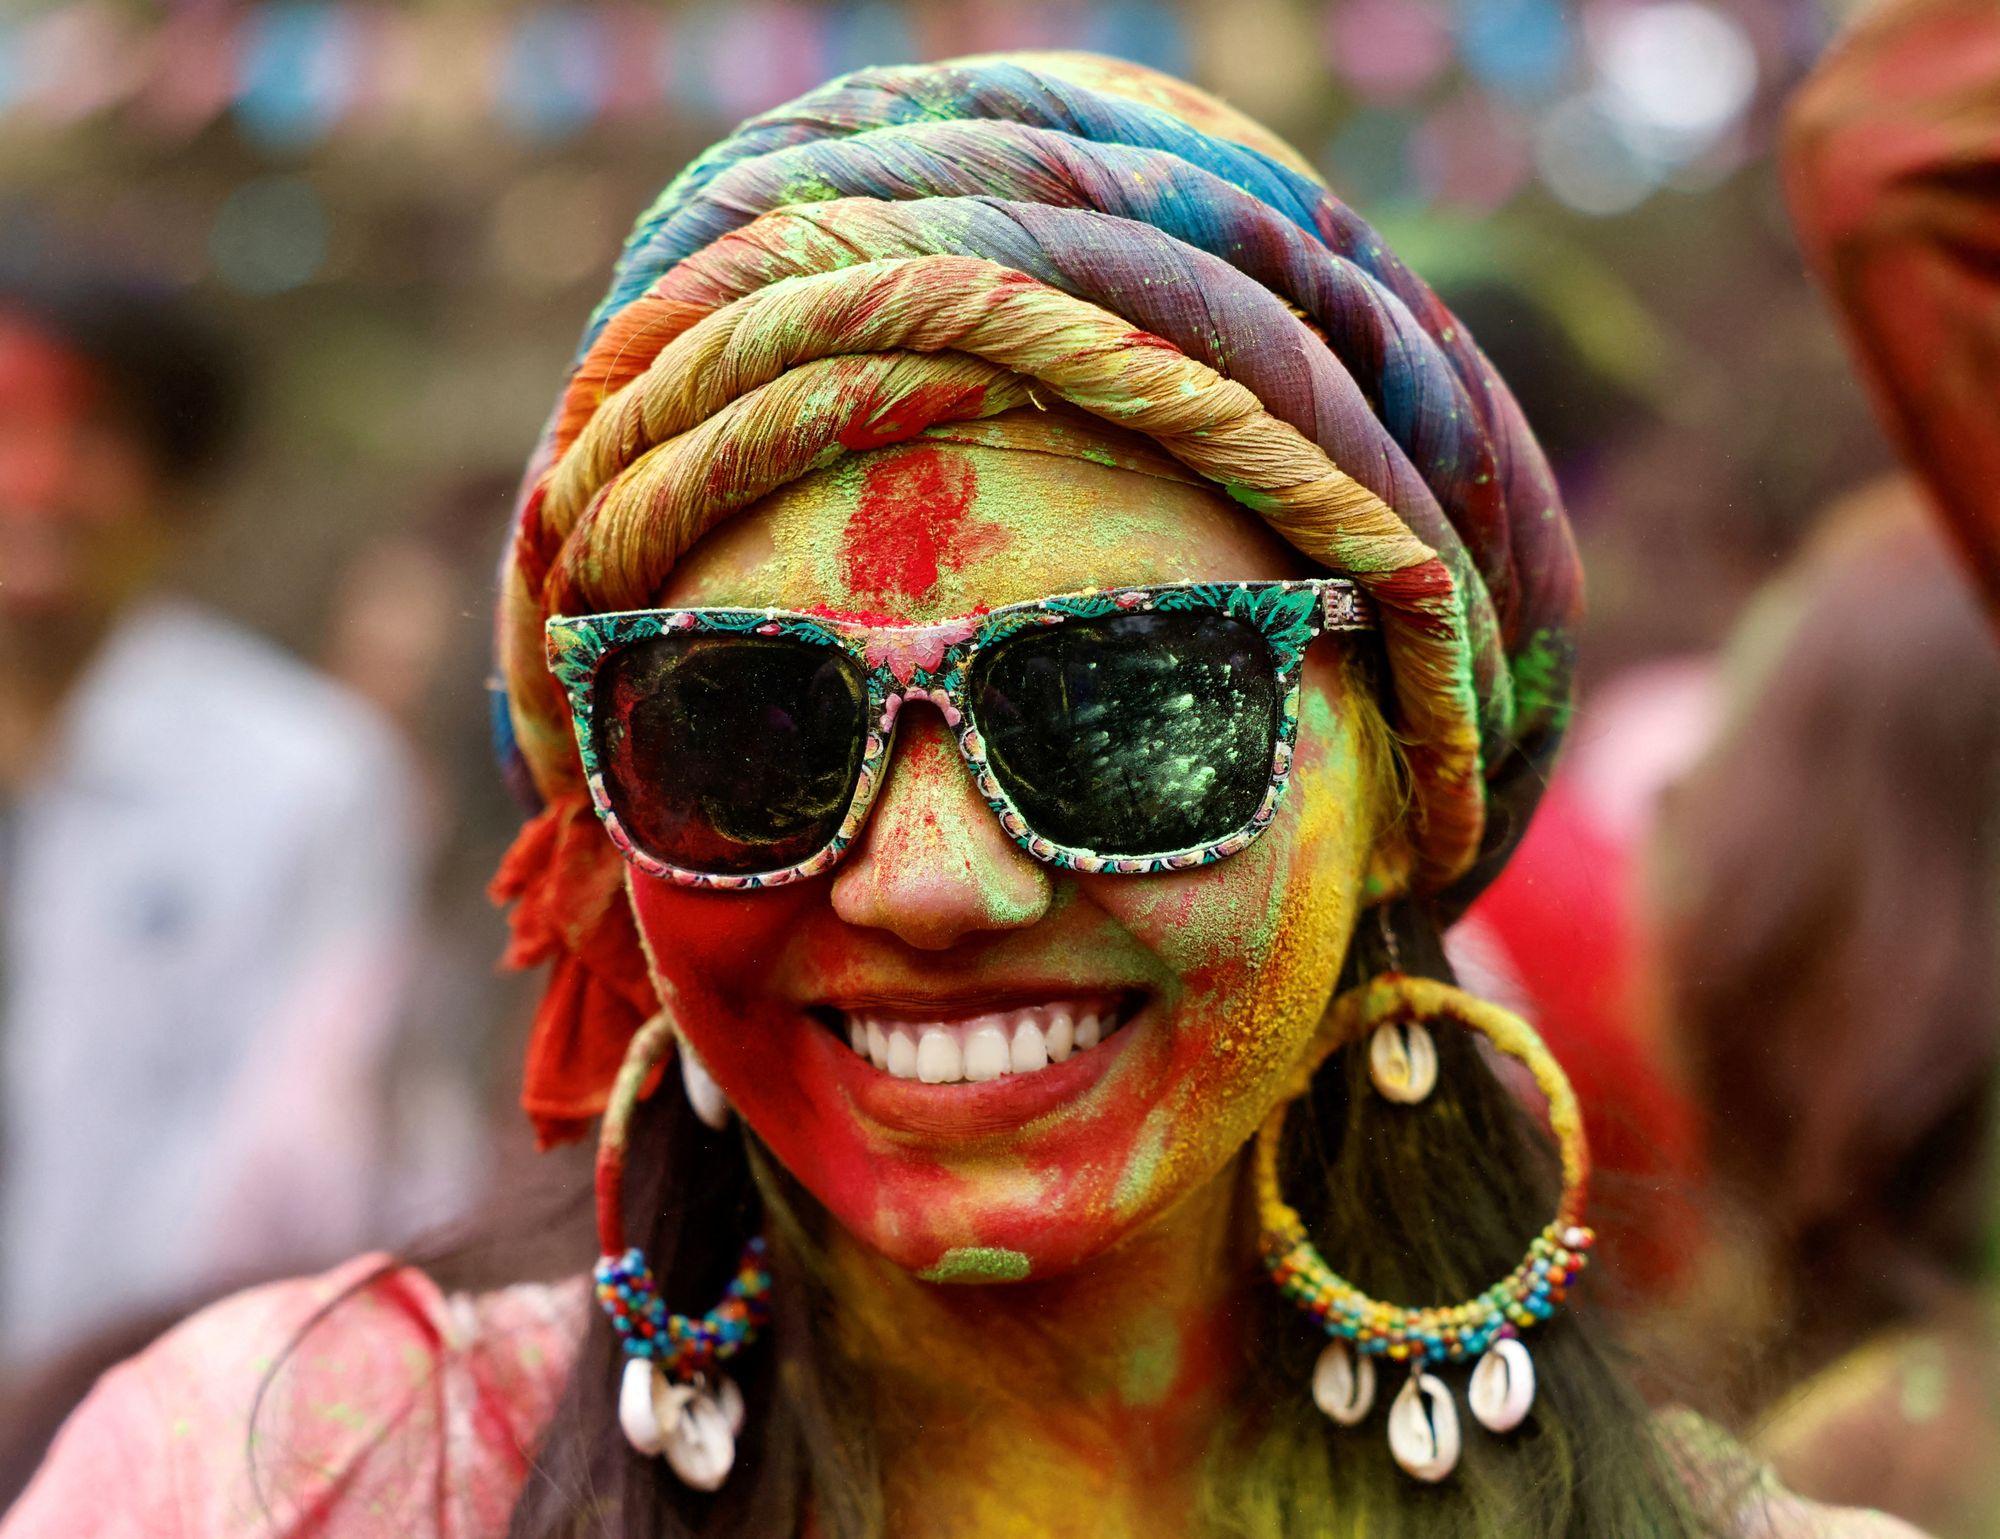 A girl smiles during the celebration of Holi